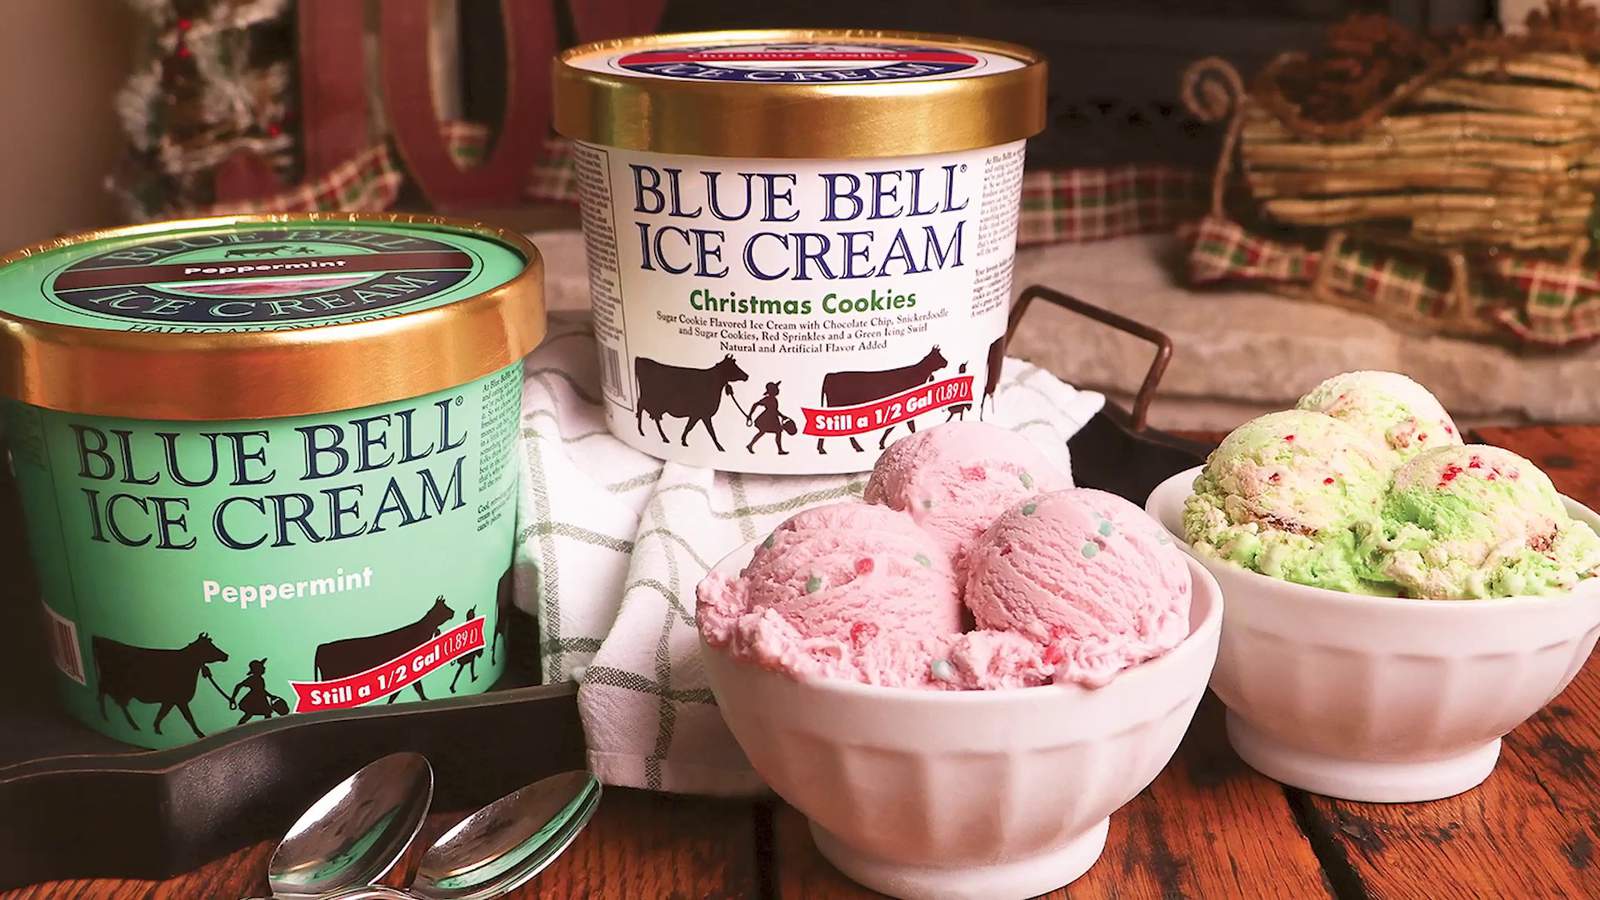 Christmas came early: Blue Bell ice cream holiday flavors in stores now